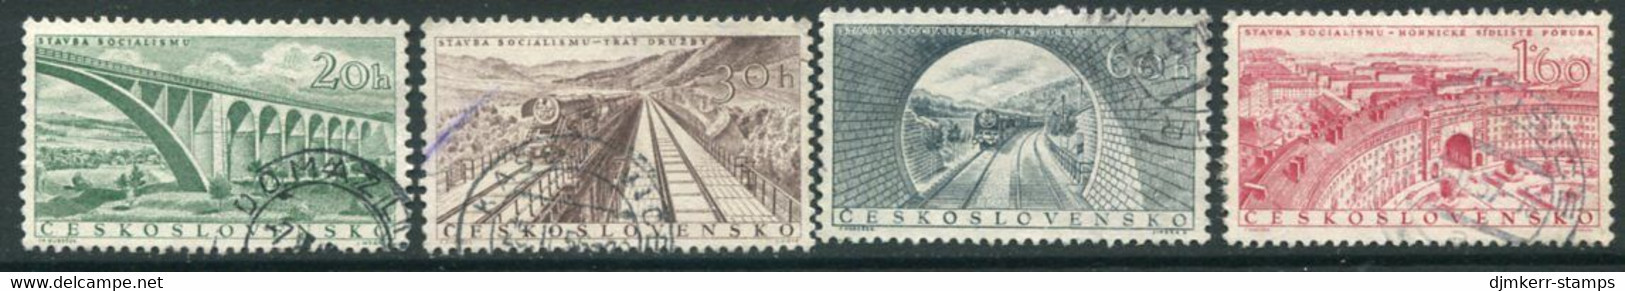 CZECHOSLOVAKIA 1955 Building Of Socialism Used.  Michel 945-48 - Used Stamps